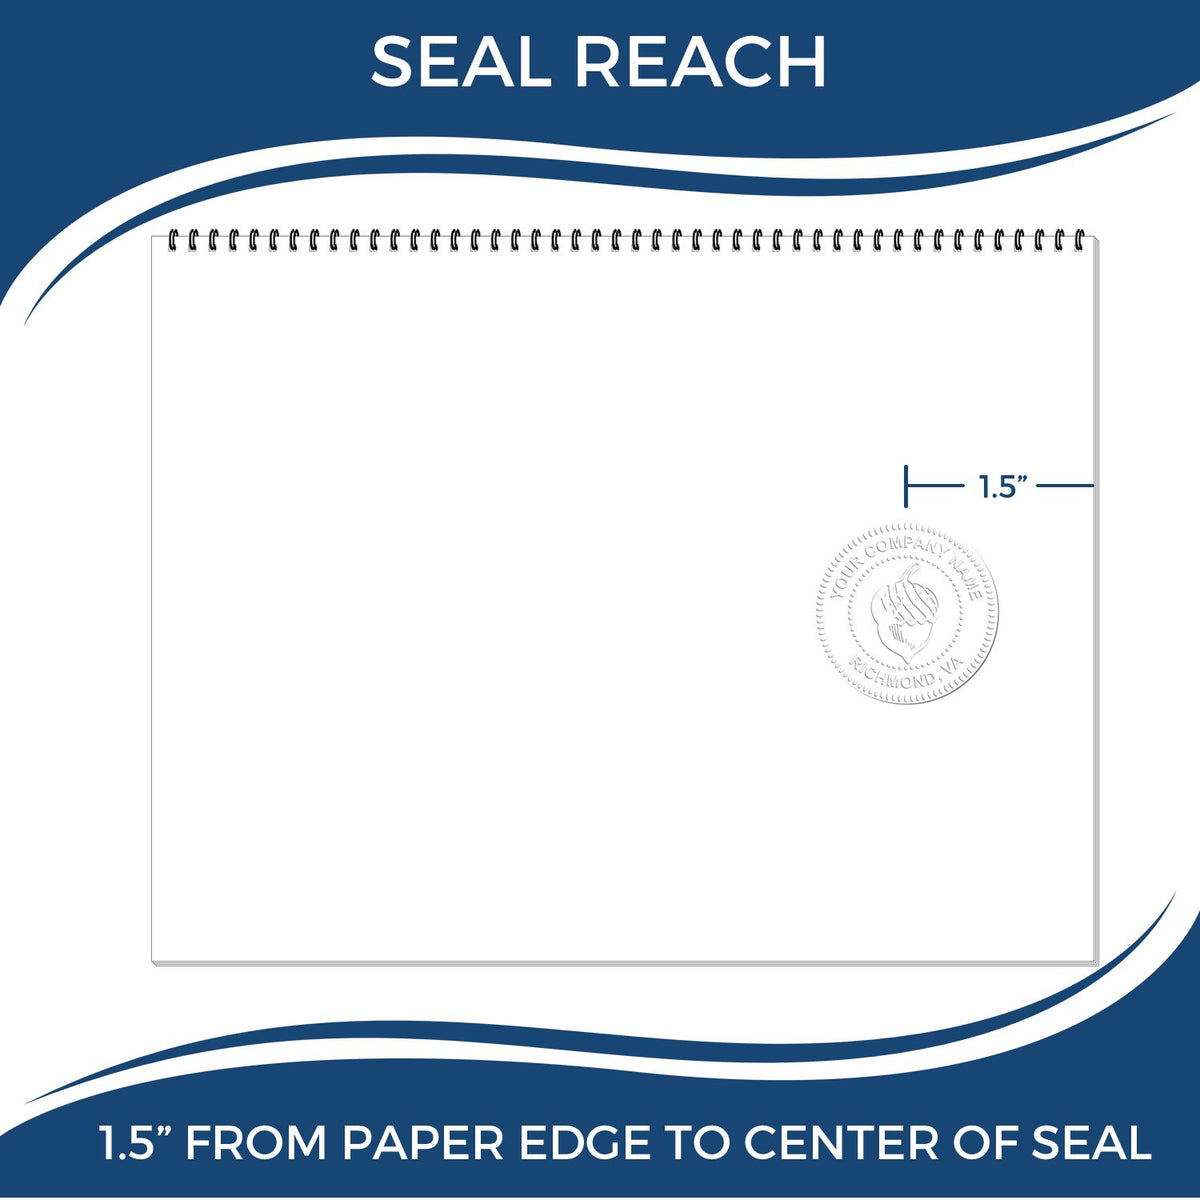 An infographic showing the seal reach which is represented by a ruler and a miniature seal image of the Hybrid Washington Land Surveyor Seal